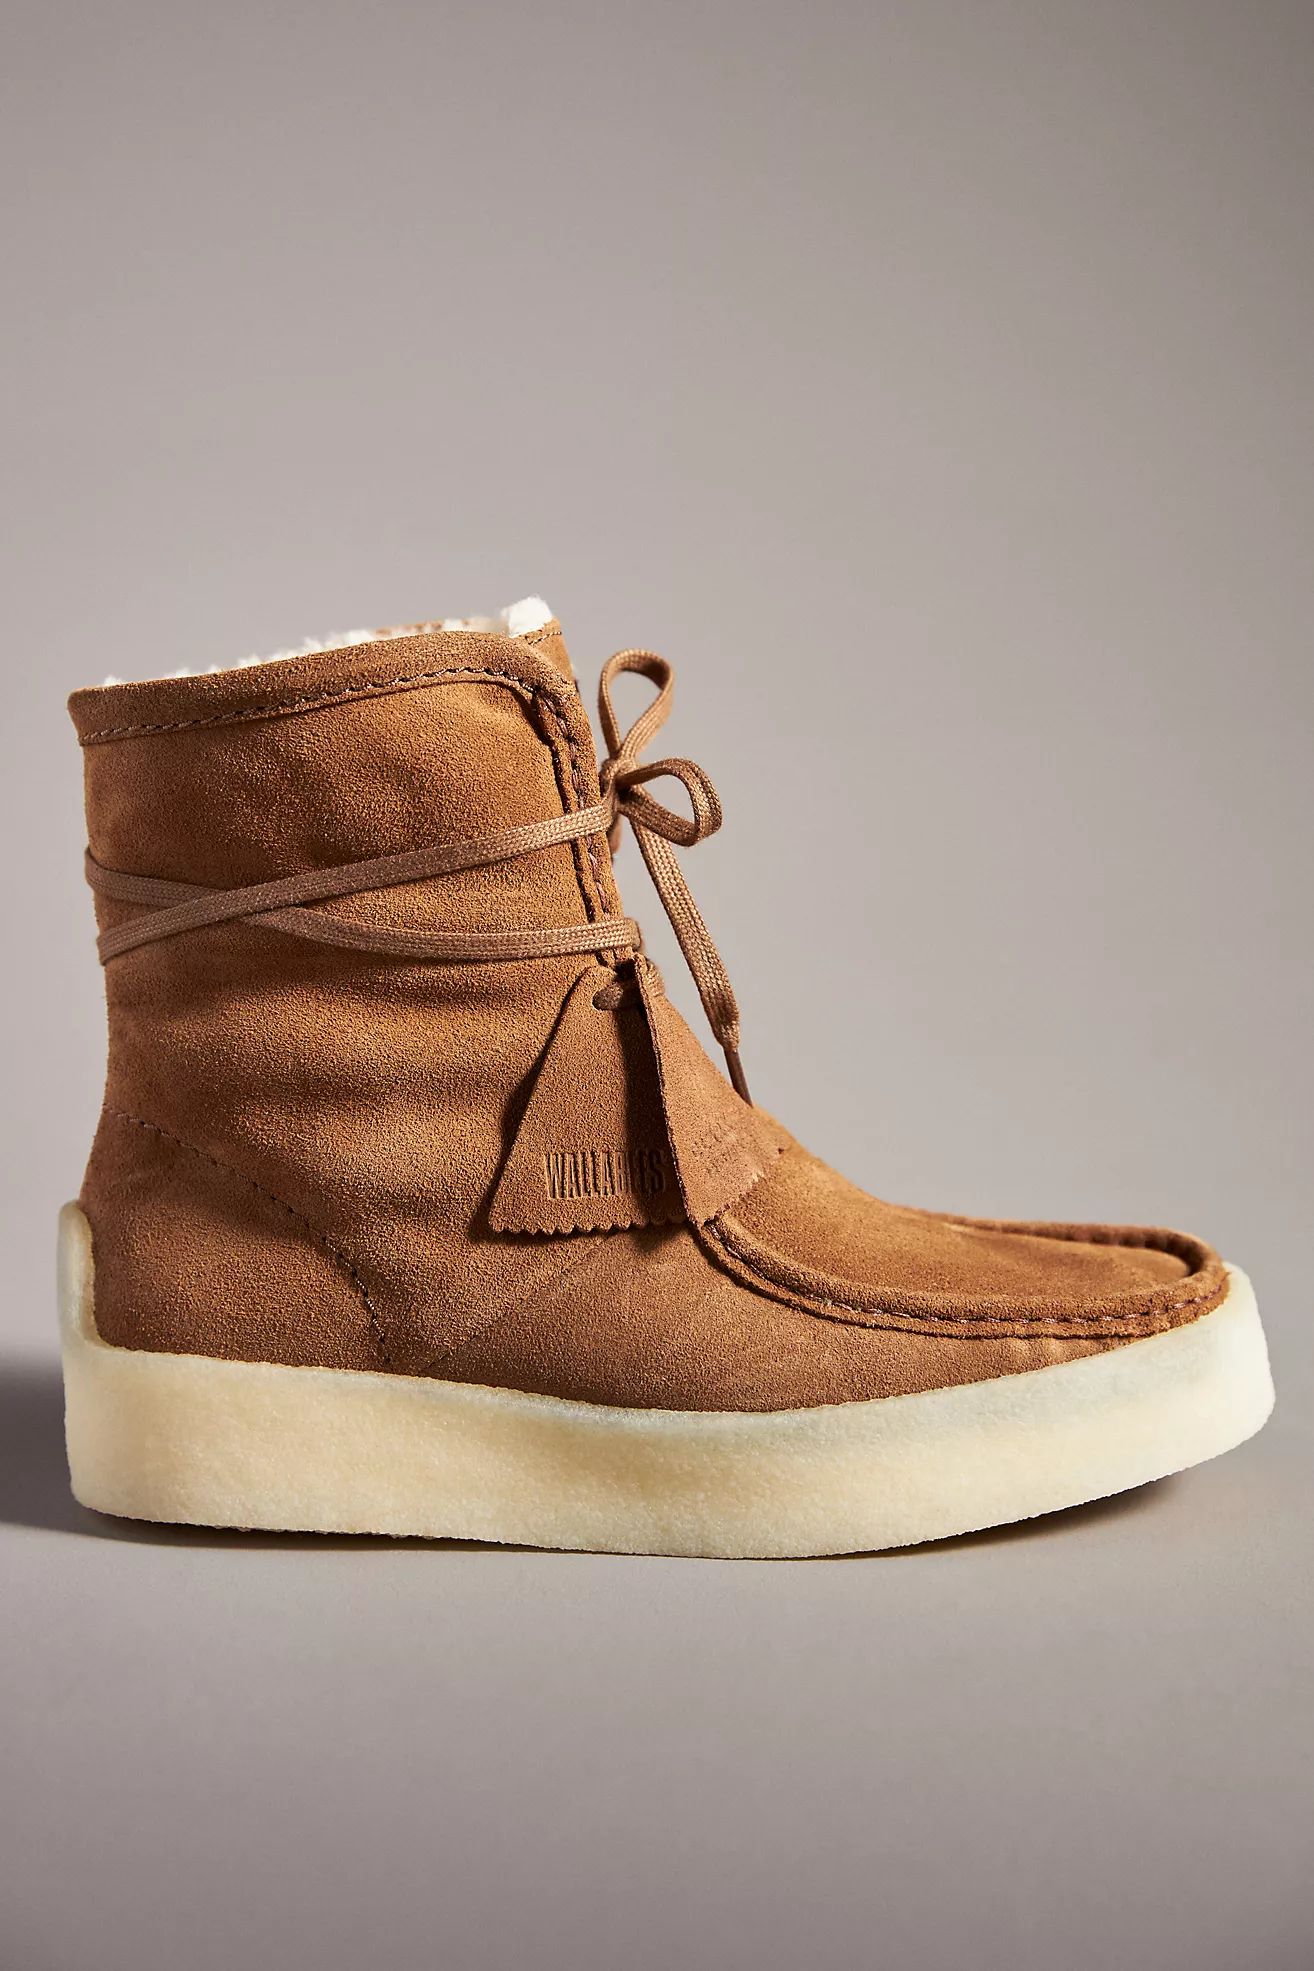 Clarks Wallabee Cup Hi Boots | Anthropologie (US)